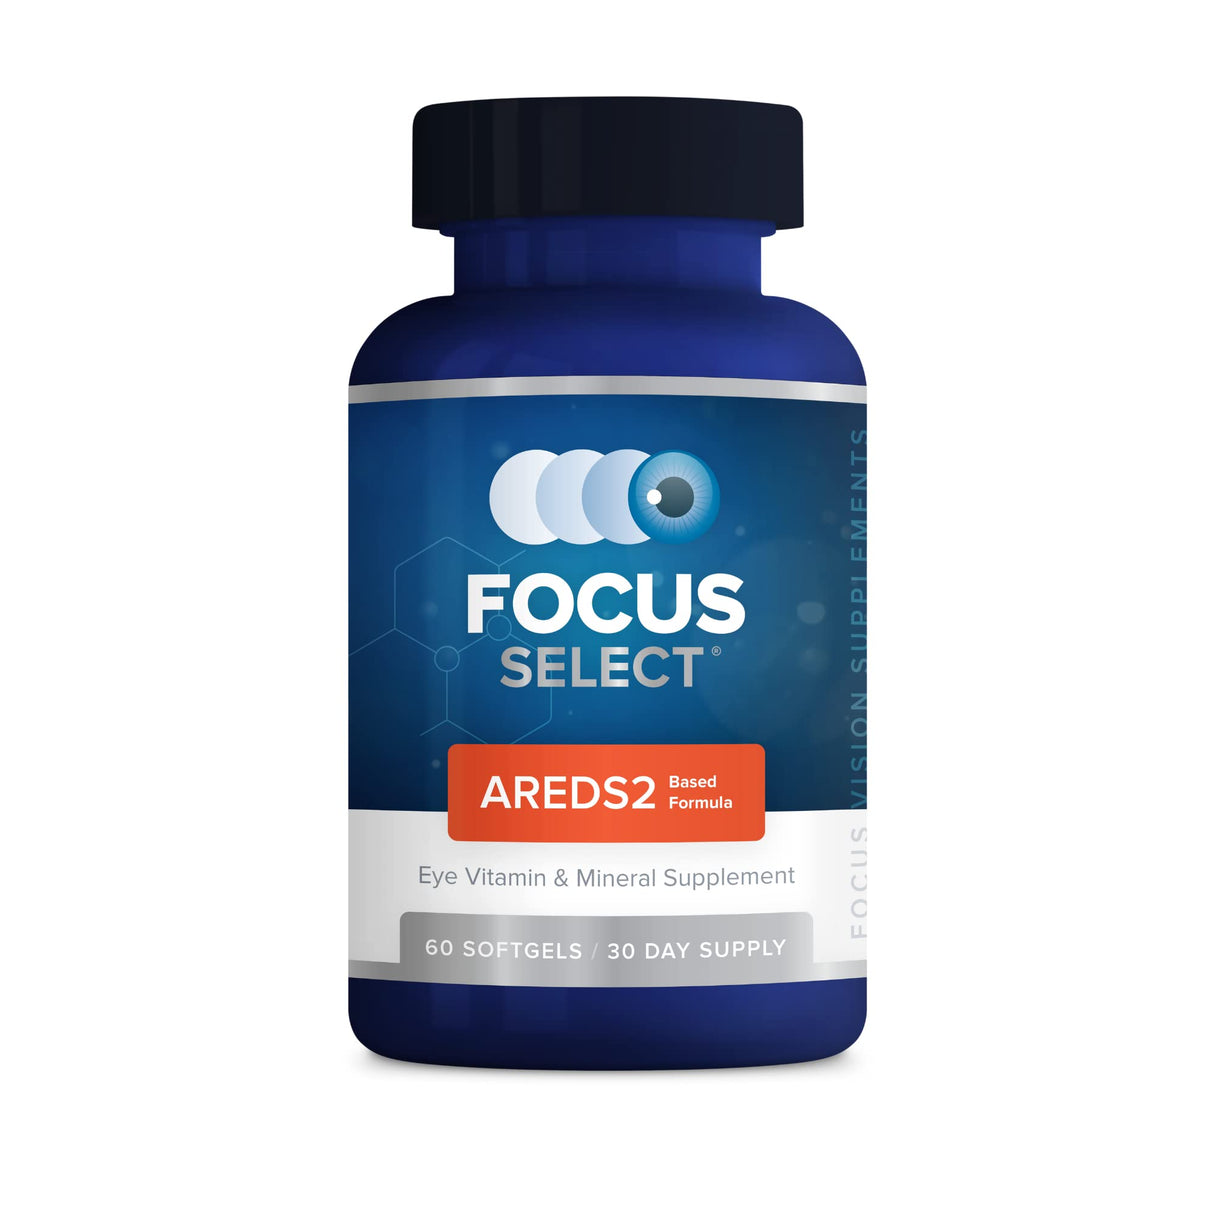 Focus Select® AREDS2 Based Eye Vitamin-Mineral Supplement - AREDS2 Based Supplement for Eyes (60 ct. 30 Day Supply) - AREDS2 Based Low Zinc Formula - Eye Vision Supplement and Vitamin